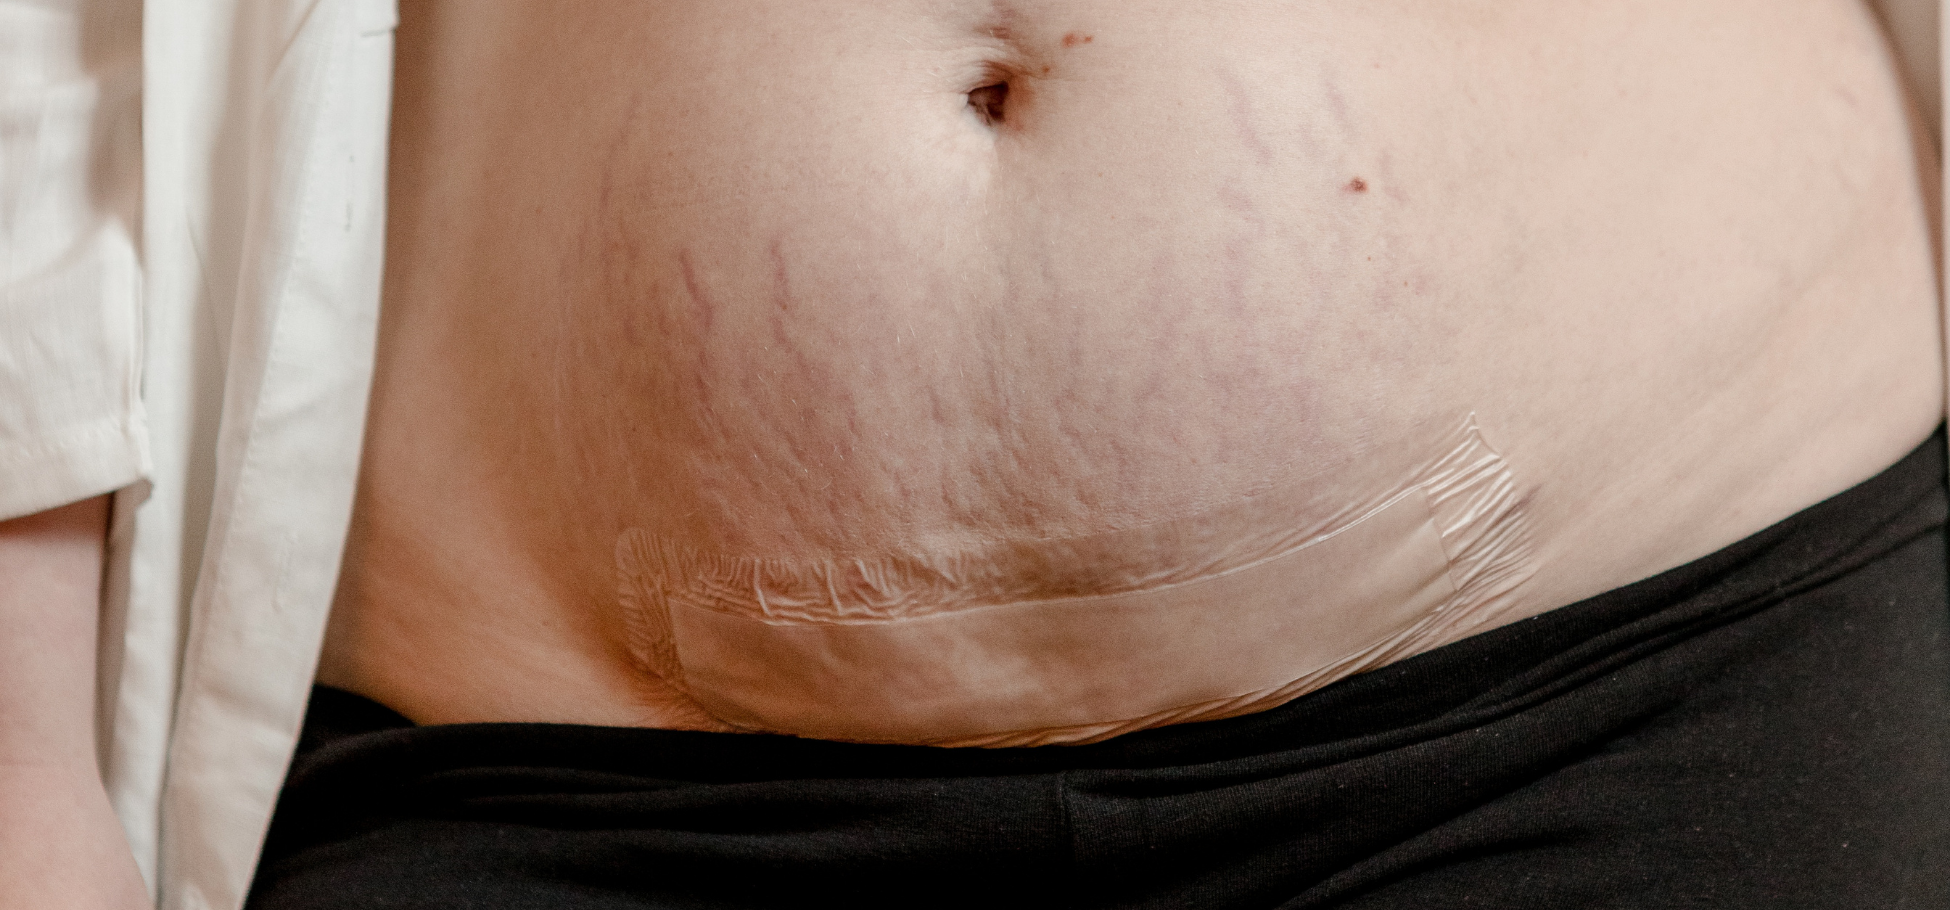 C-Section Scar Care and Treatment Guide.